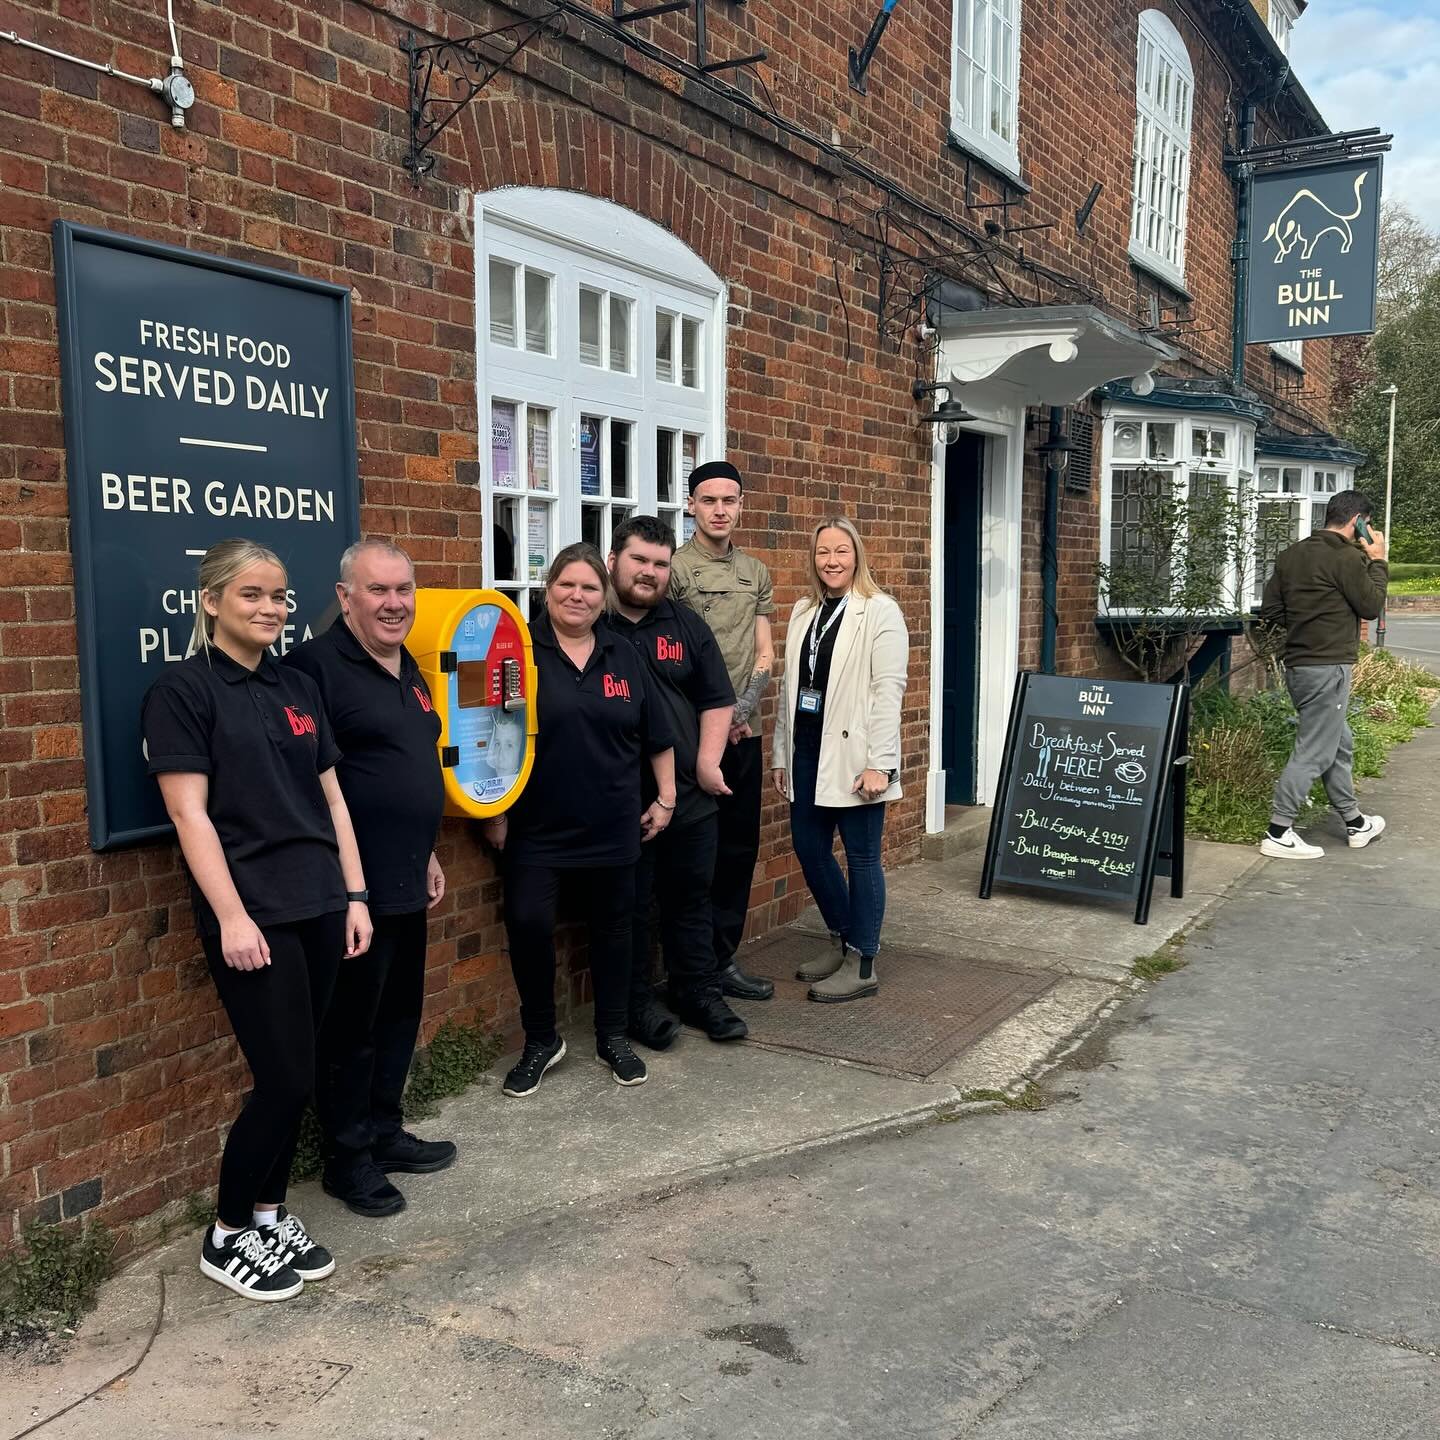 OurJays accessible defibrillator 156 is now installed at @thebullinclifton Rugby. 

Huge thanks as always to OurJays heroes Andy Crane &amp; James @jrpelectricalservices for installing this defib completely free of charge. We&rsquo;d also like to say